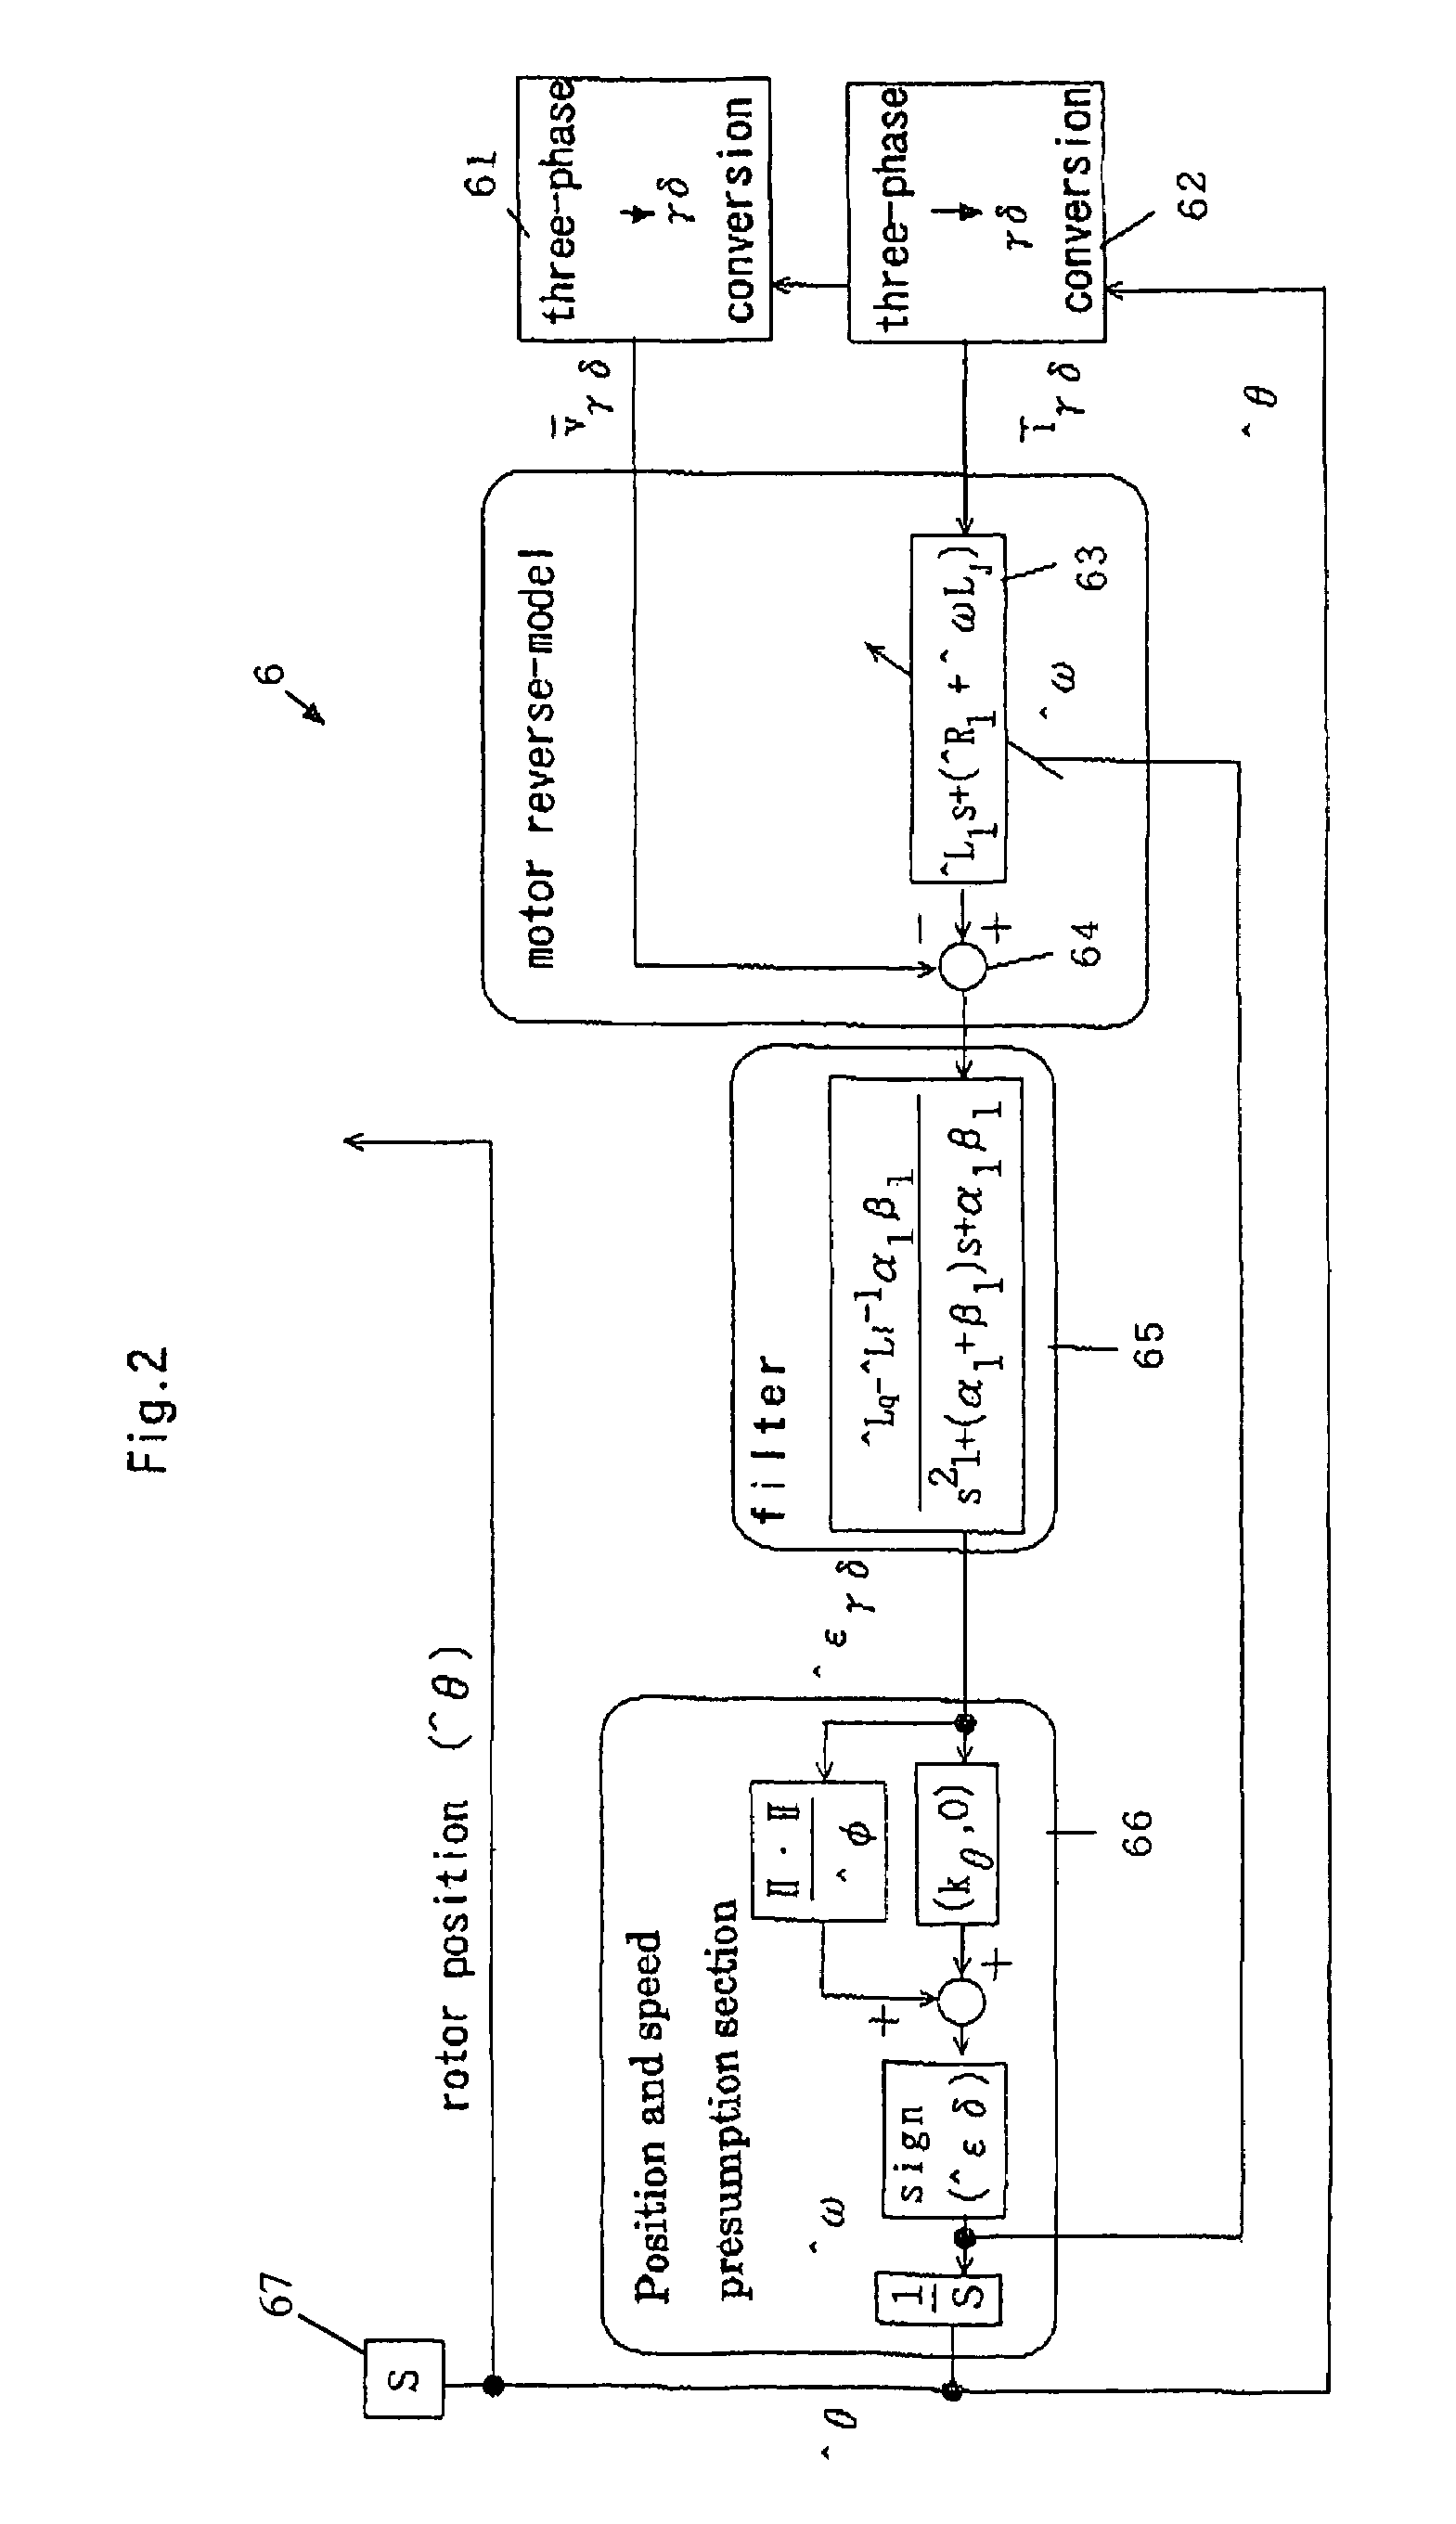 Synchronous motor control method and device